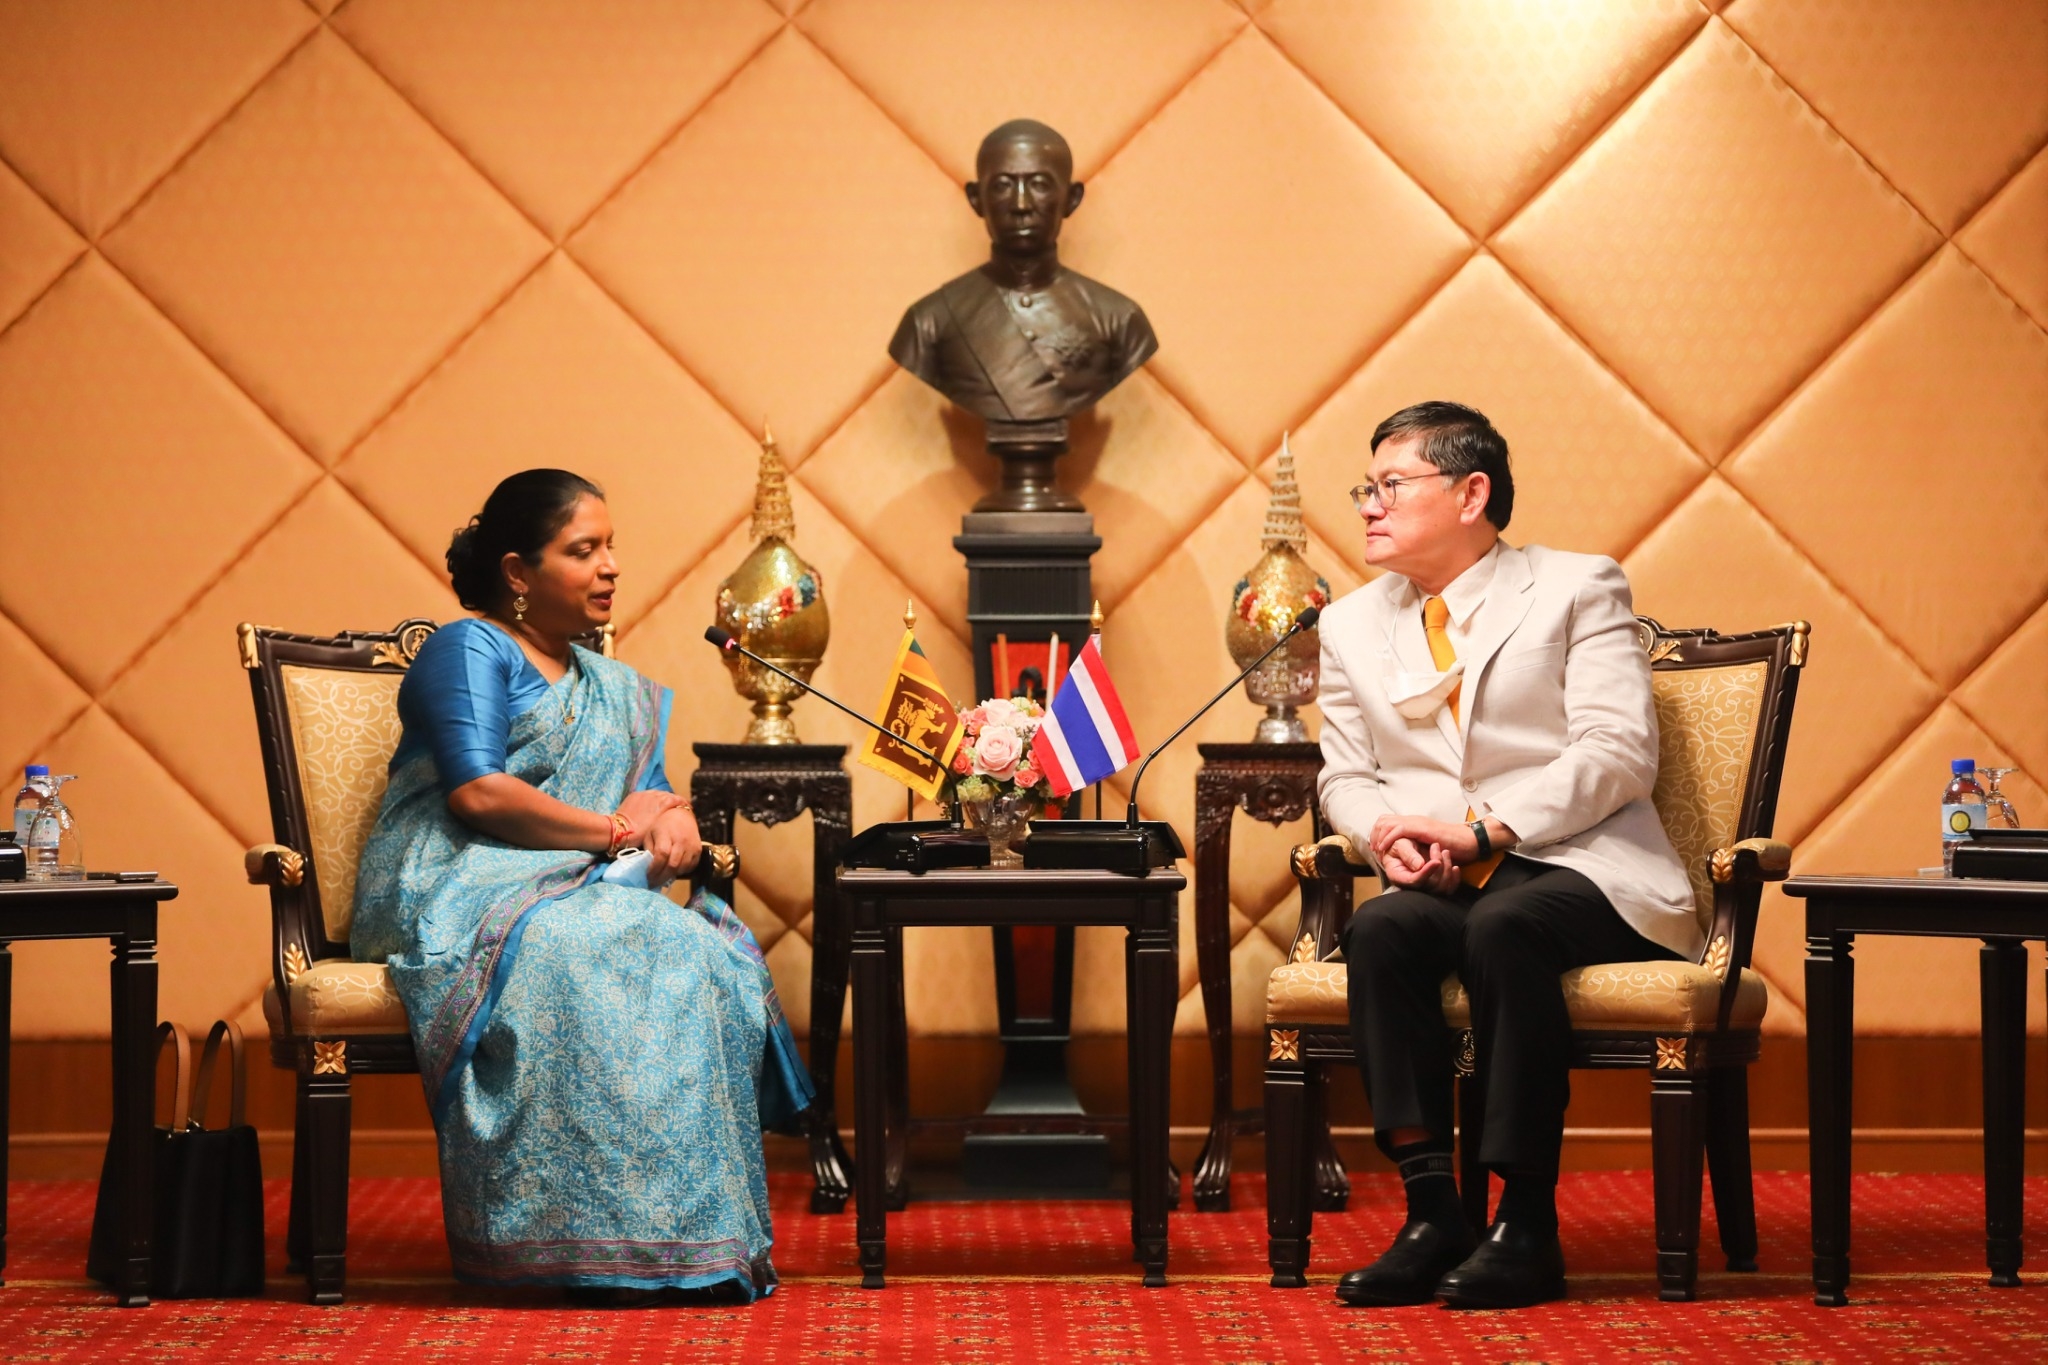 Minister of Higher Education, Science, Research and Innovation of Thailand Prof. Dr. Anek Laothamatas assures Sri Lanka’s envoy to accelerate bilateral cooperation